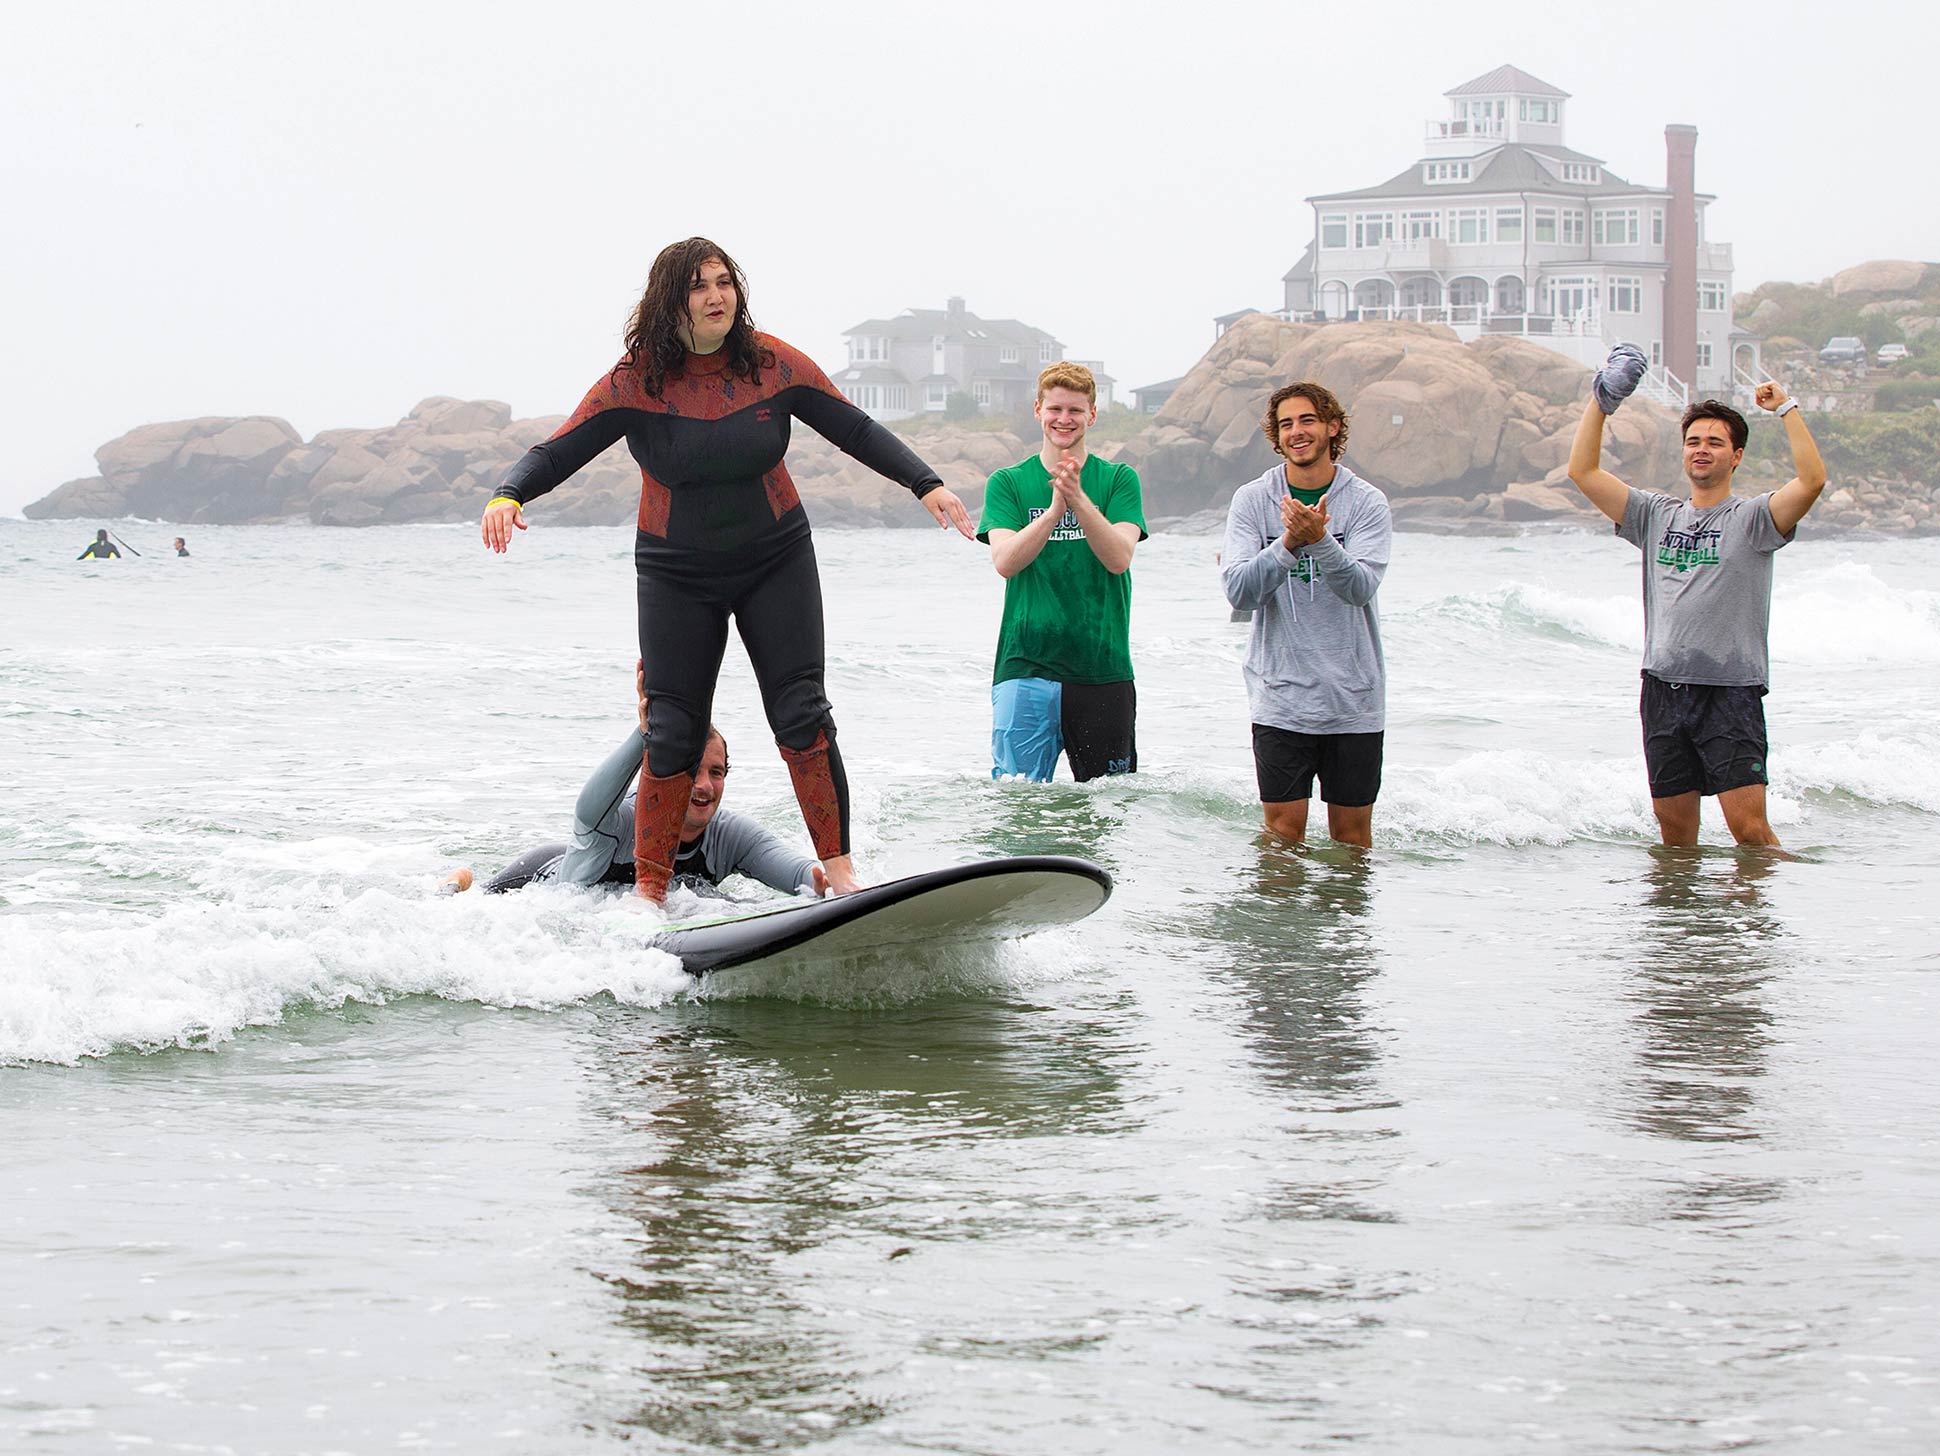 students surfing